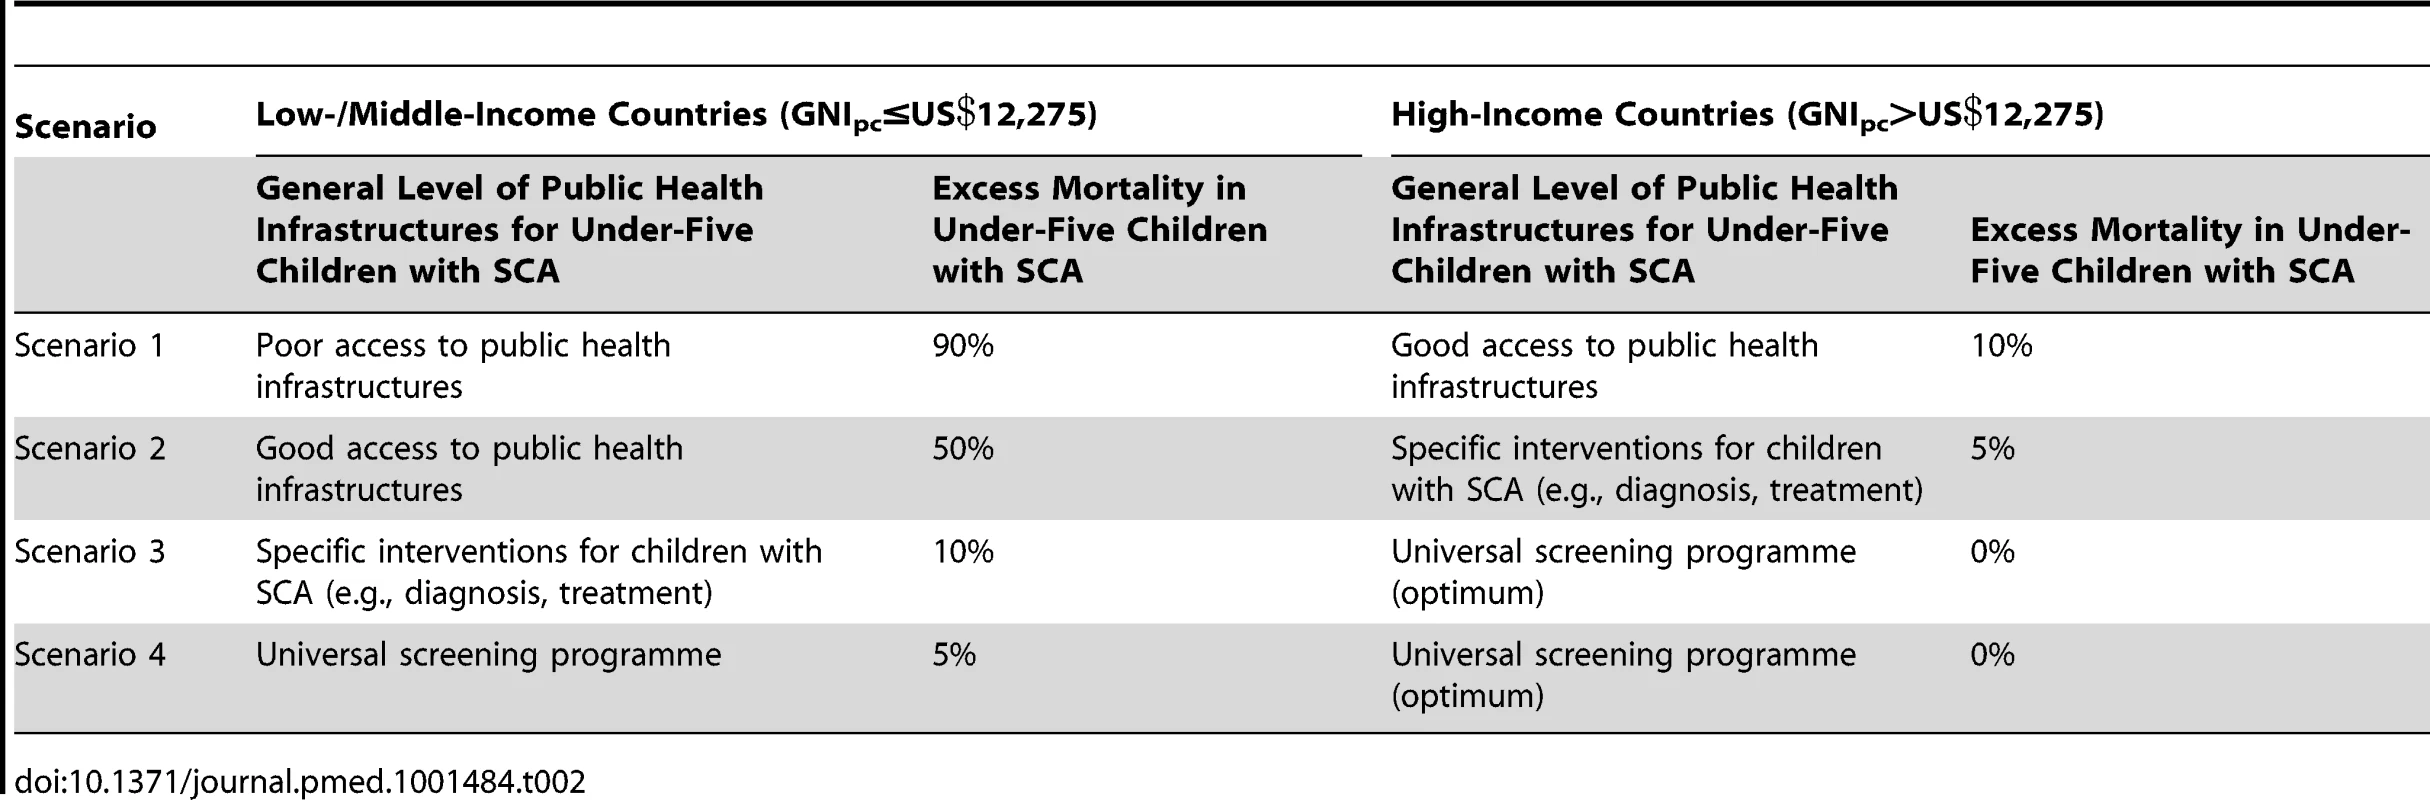 Summary of the level of public health infrastructure and excess mortality considered per income class and for each of the four scenarios tested.